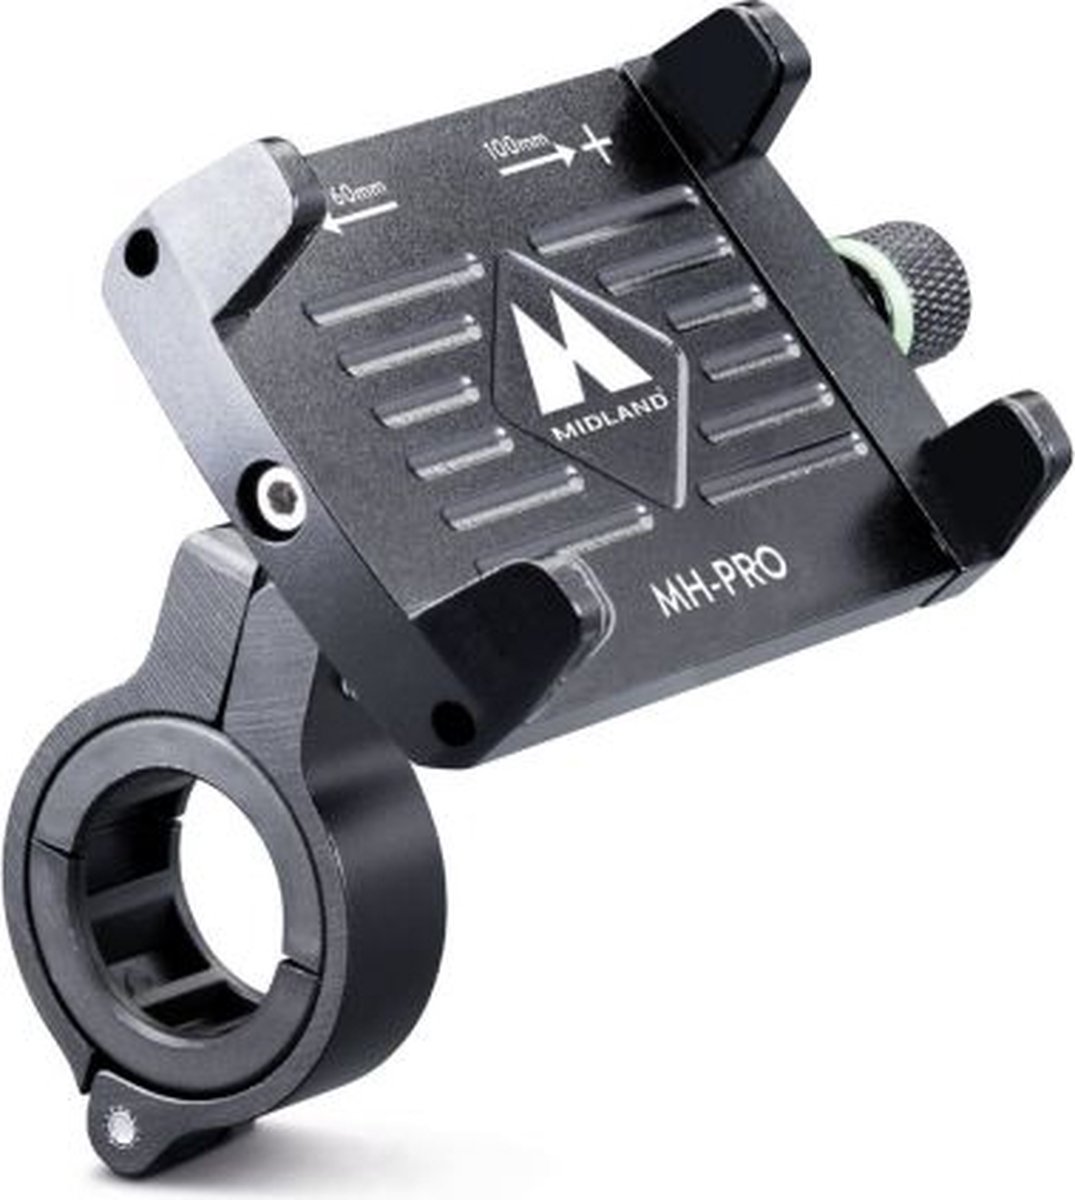 Midland MH-Pro up to 6.2'' -